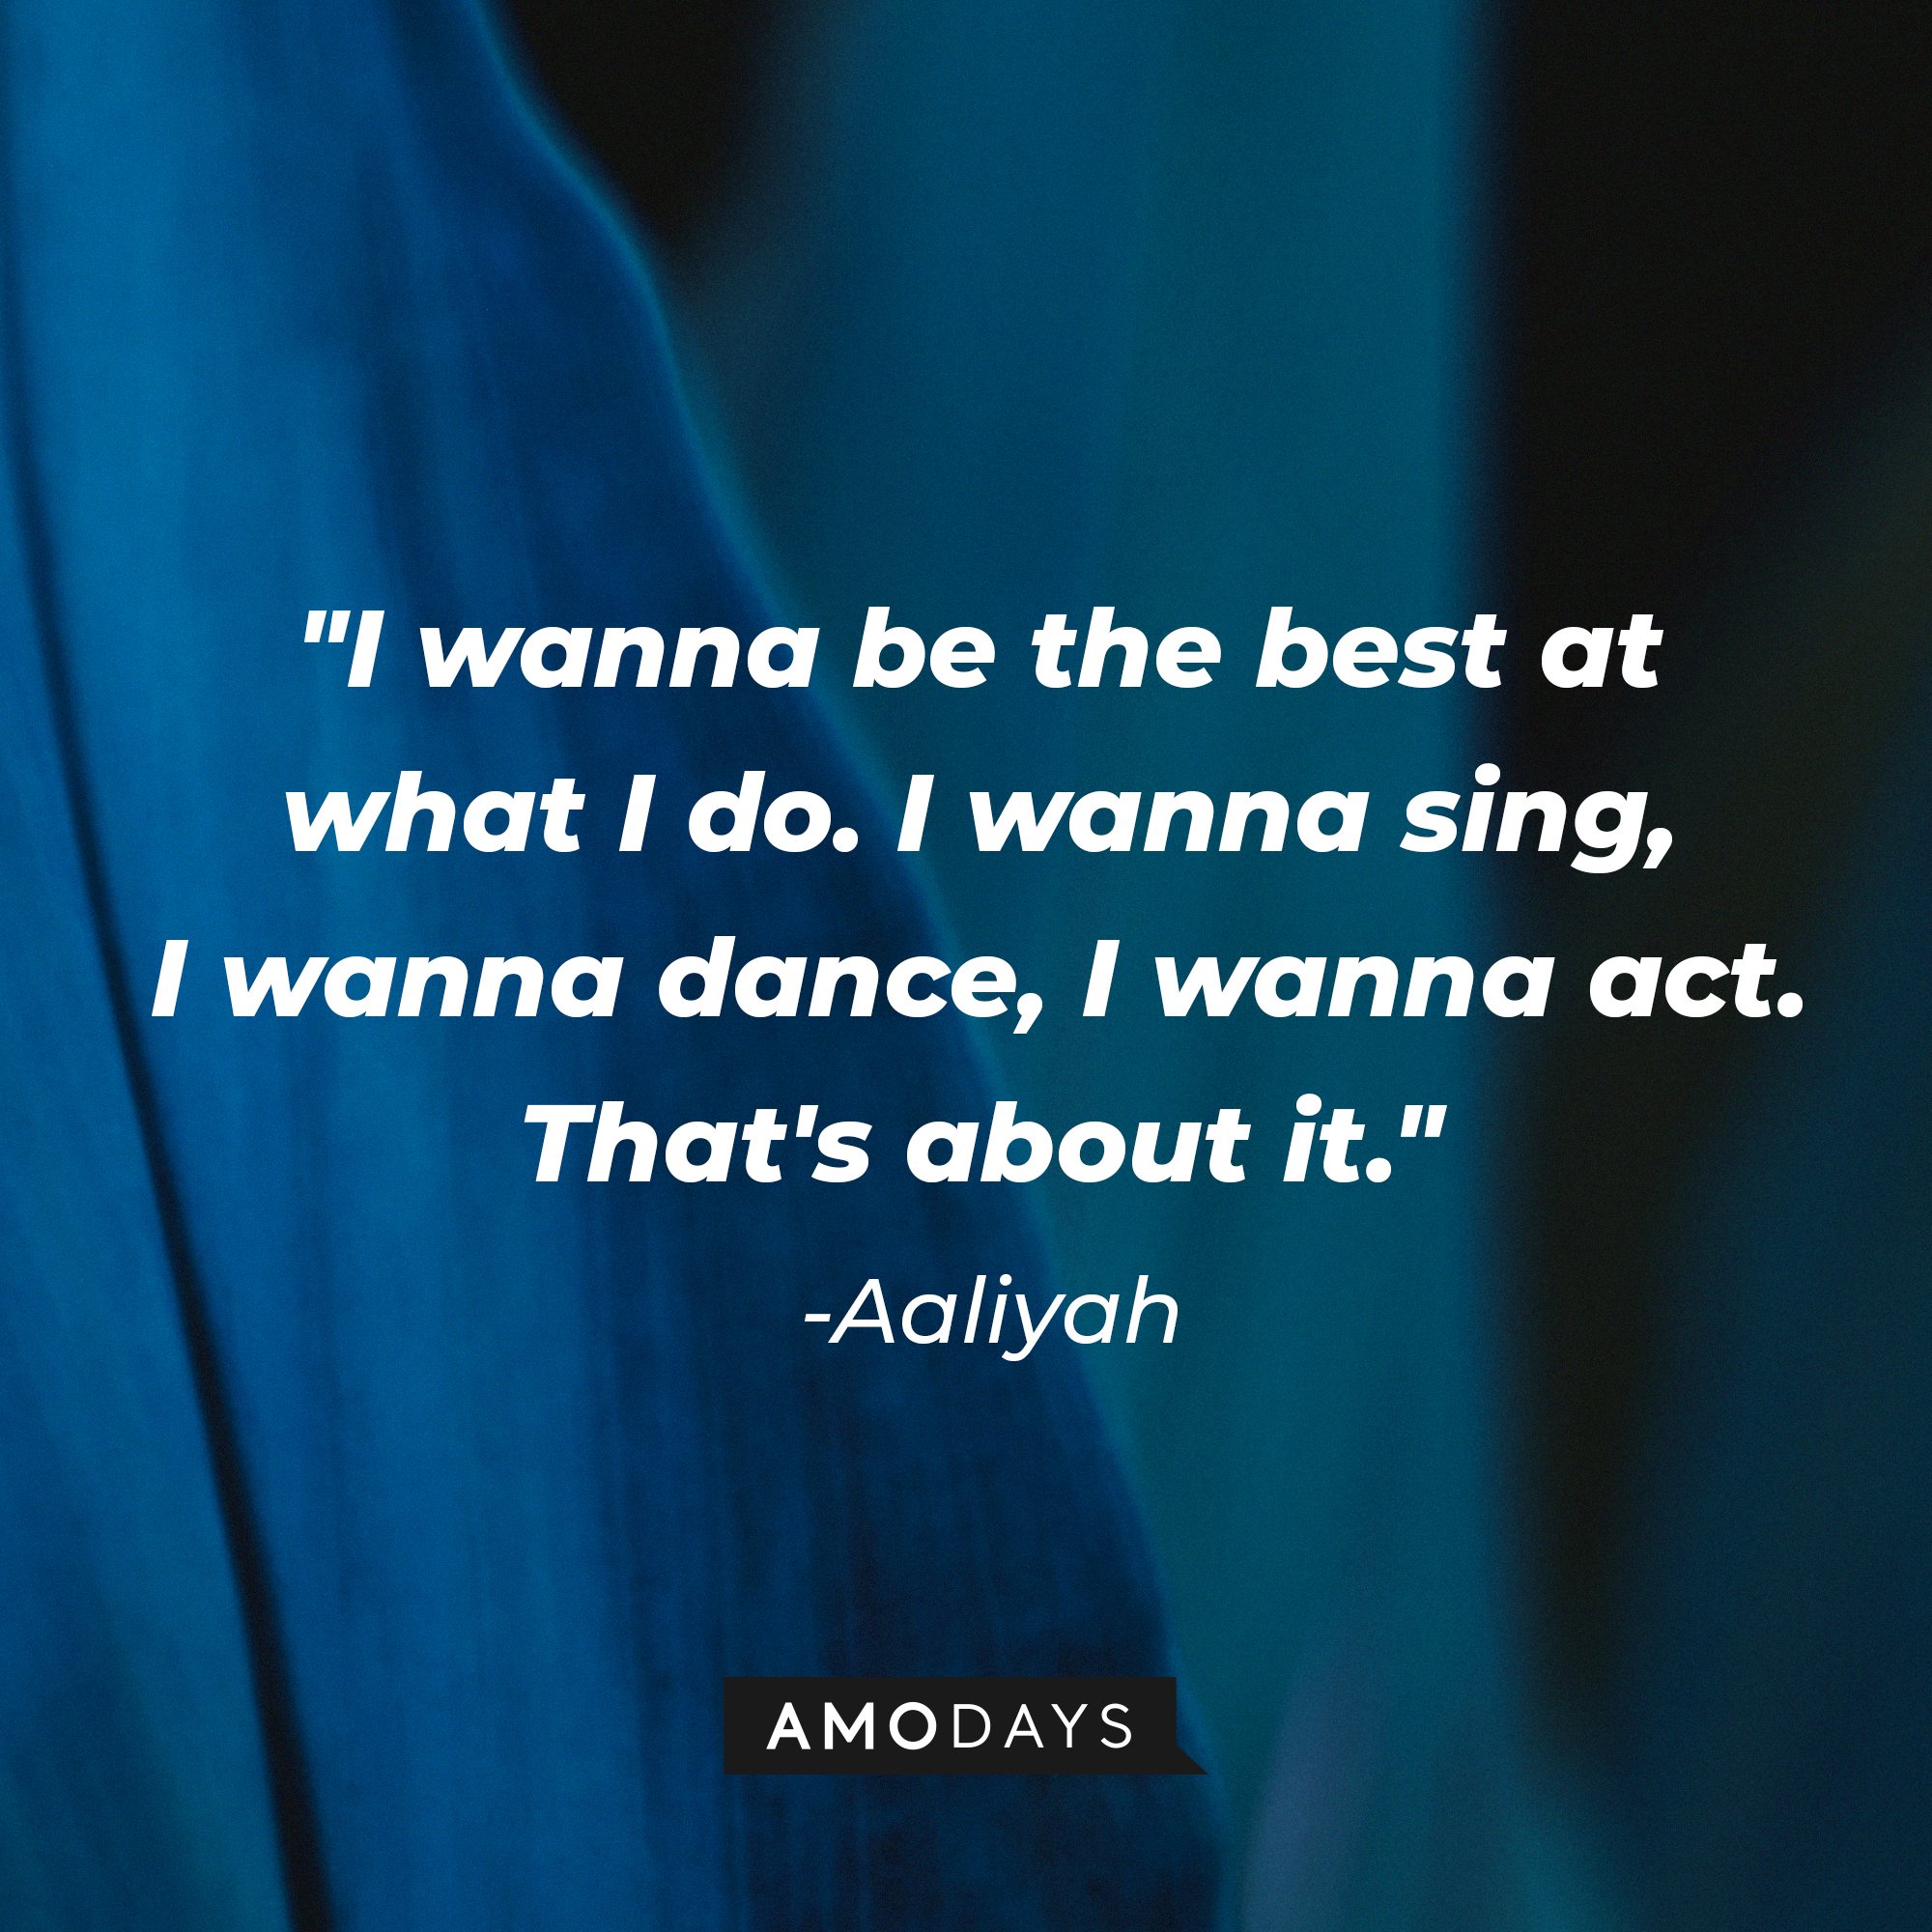 Aaliyah’s quote: "I wanna be the best at what I do. I wanna sing, I wanna dance, I wanna act. That's about it." | Image: AmoDays